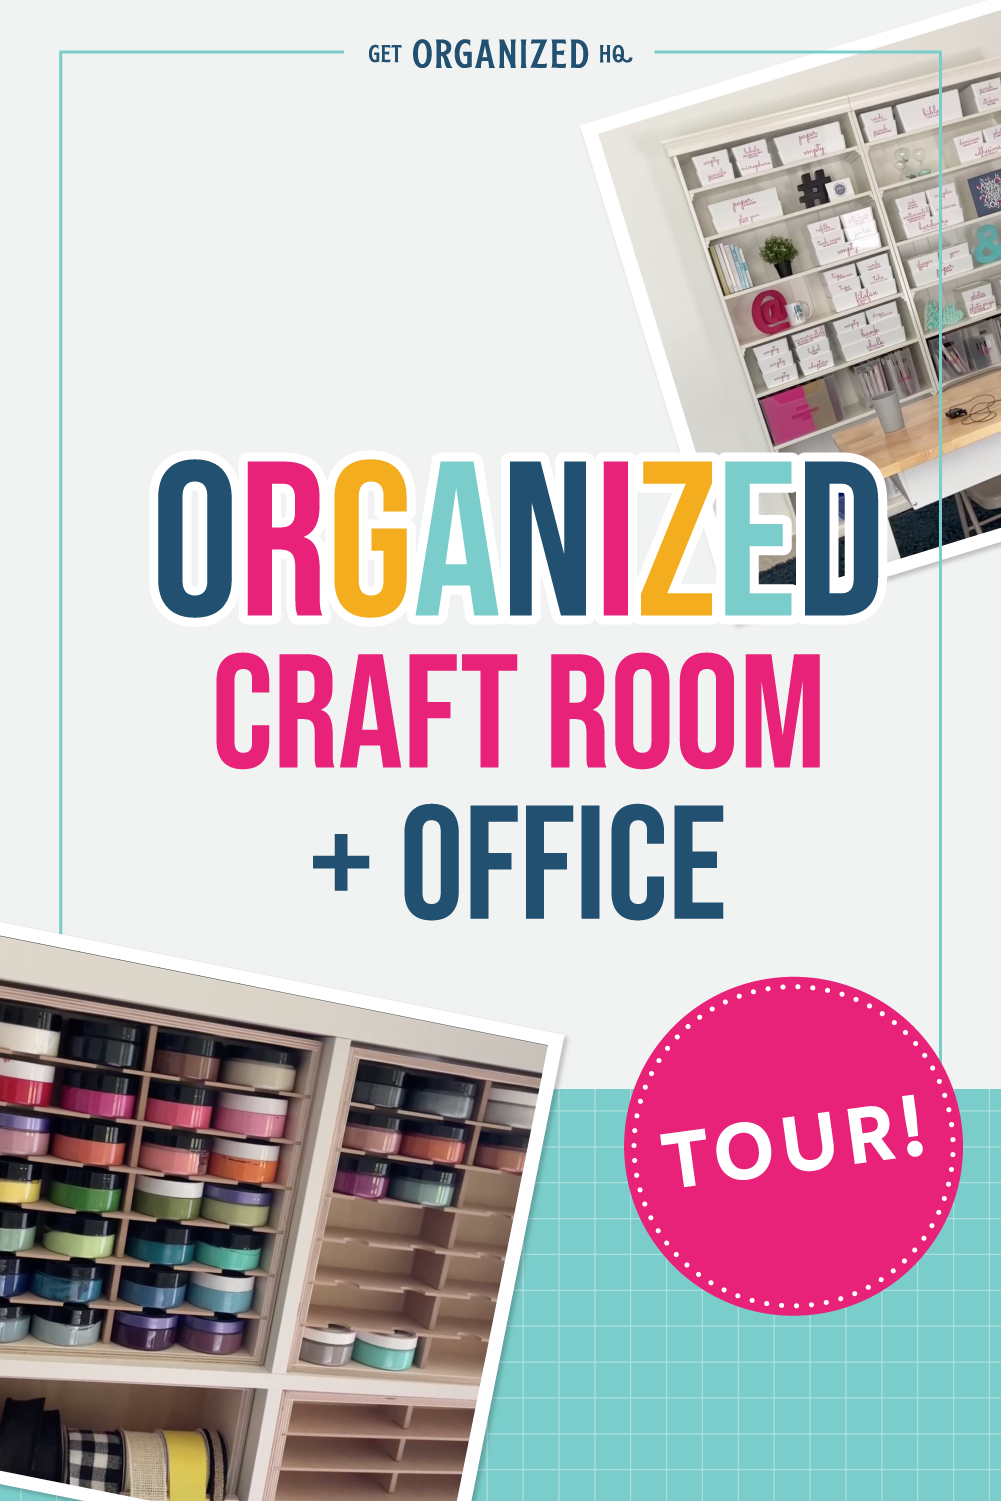 The Best Cricut Setup For Your Office  Office craft room combo, Craft room  office, Office organization at work